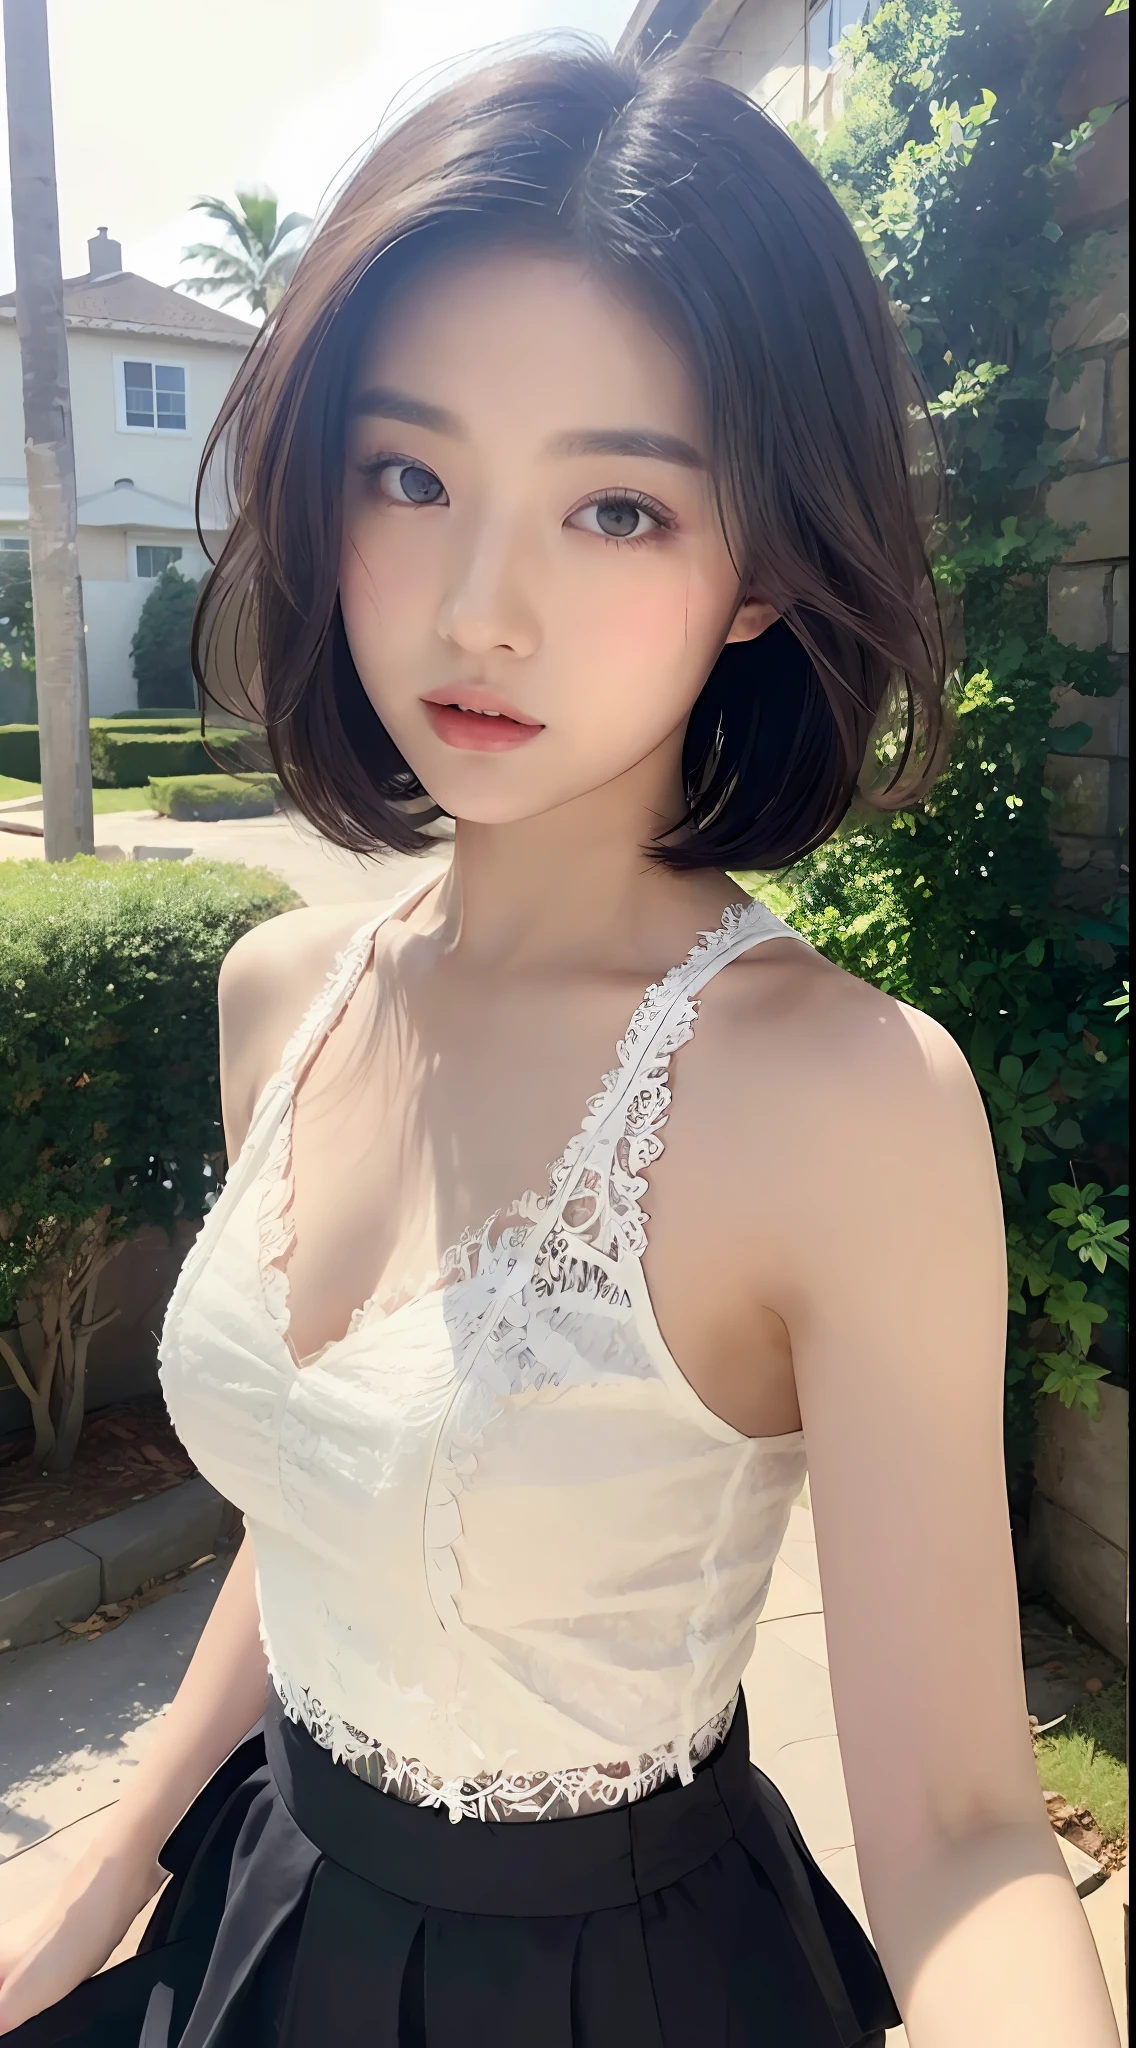 ((Best Quality, 8K, Masterpiece: 1.3)), (Lace Top with Skirt: 1.3), Focus: 1.2, Perfect Body Beauty: 1.4, Buttocks: 1.2, ((Layered Haircut: 1.2)), (Dark Street: 1.3), Highly detailed face and skin texture, detailed eyes, double eyelids, whitening skin, layered short hair,